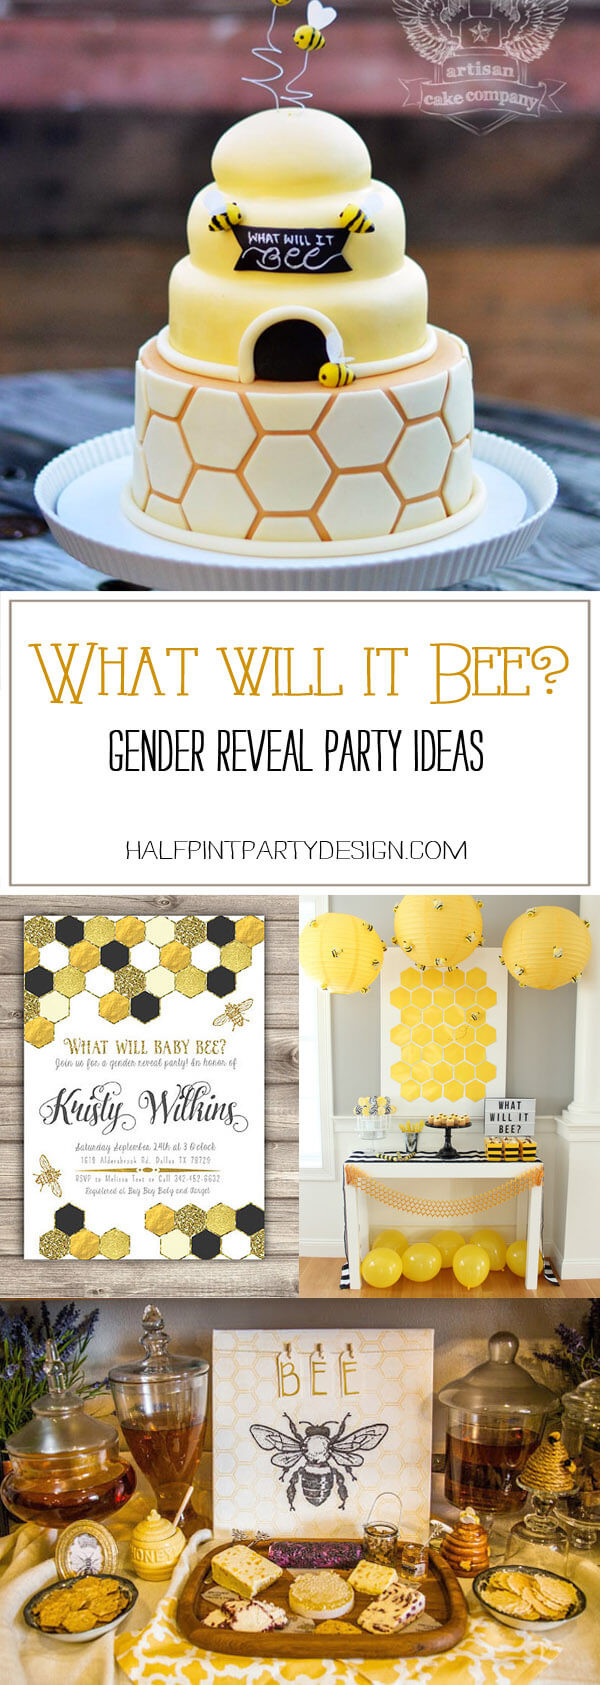 Bee Gender Reveal Party Ideas
 What Will it Bee Gender Reveal Party Ideas Halfpint